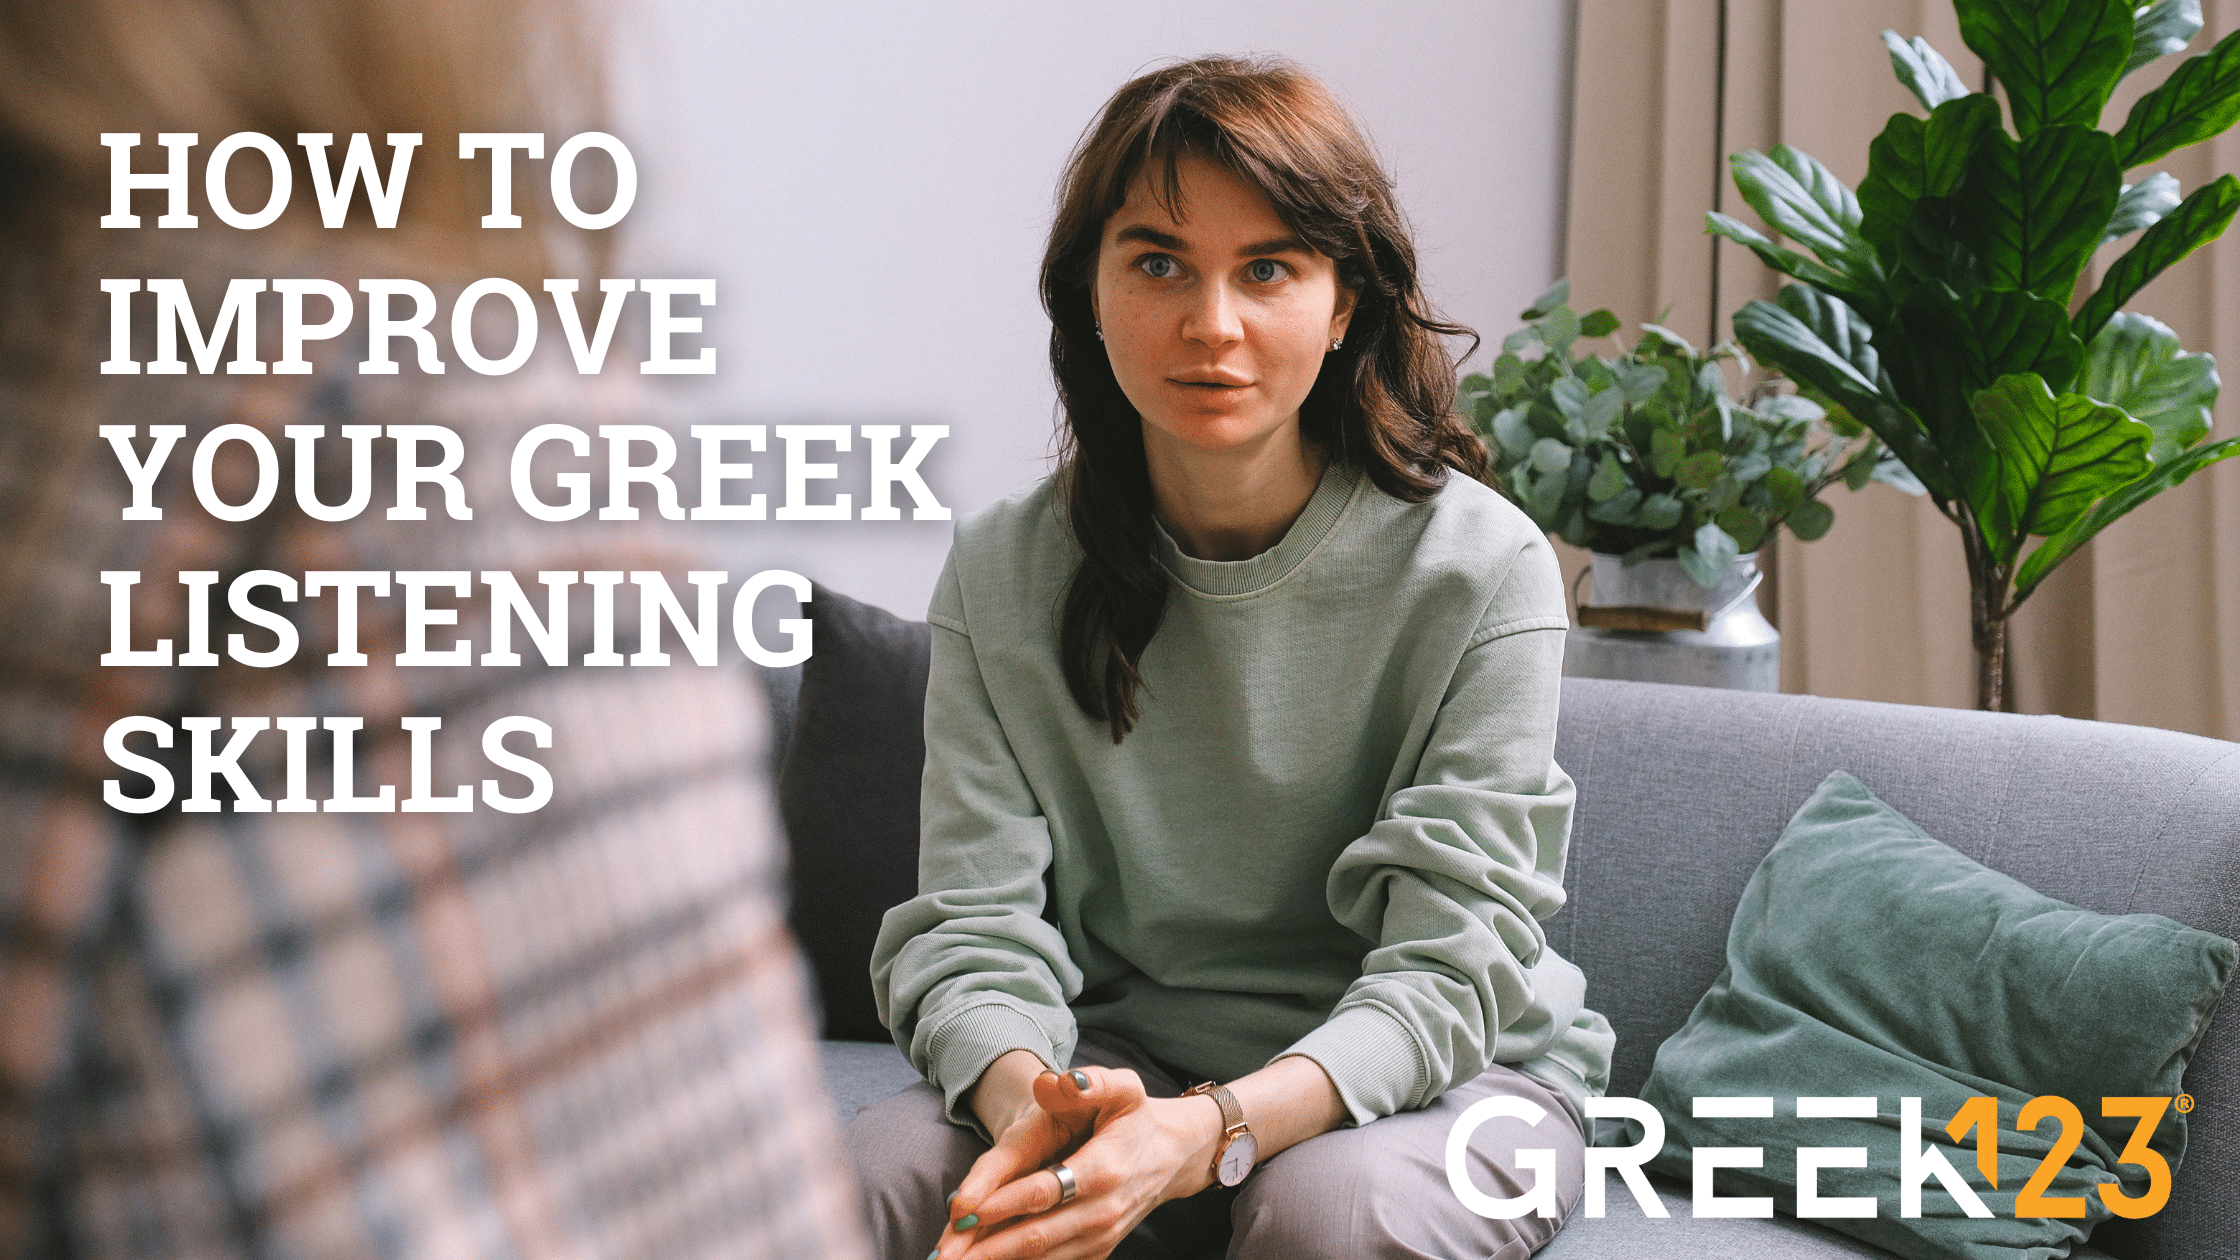 How to Improve Your Greek Listening Skills